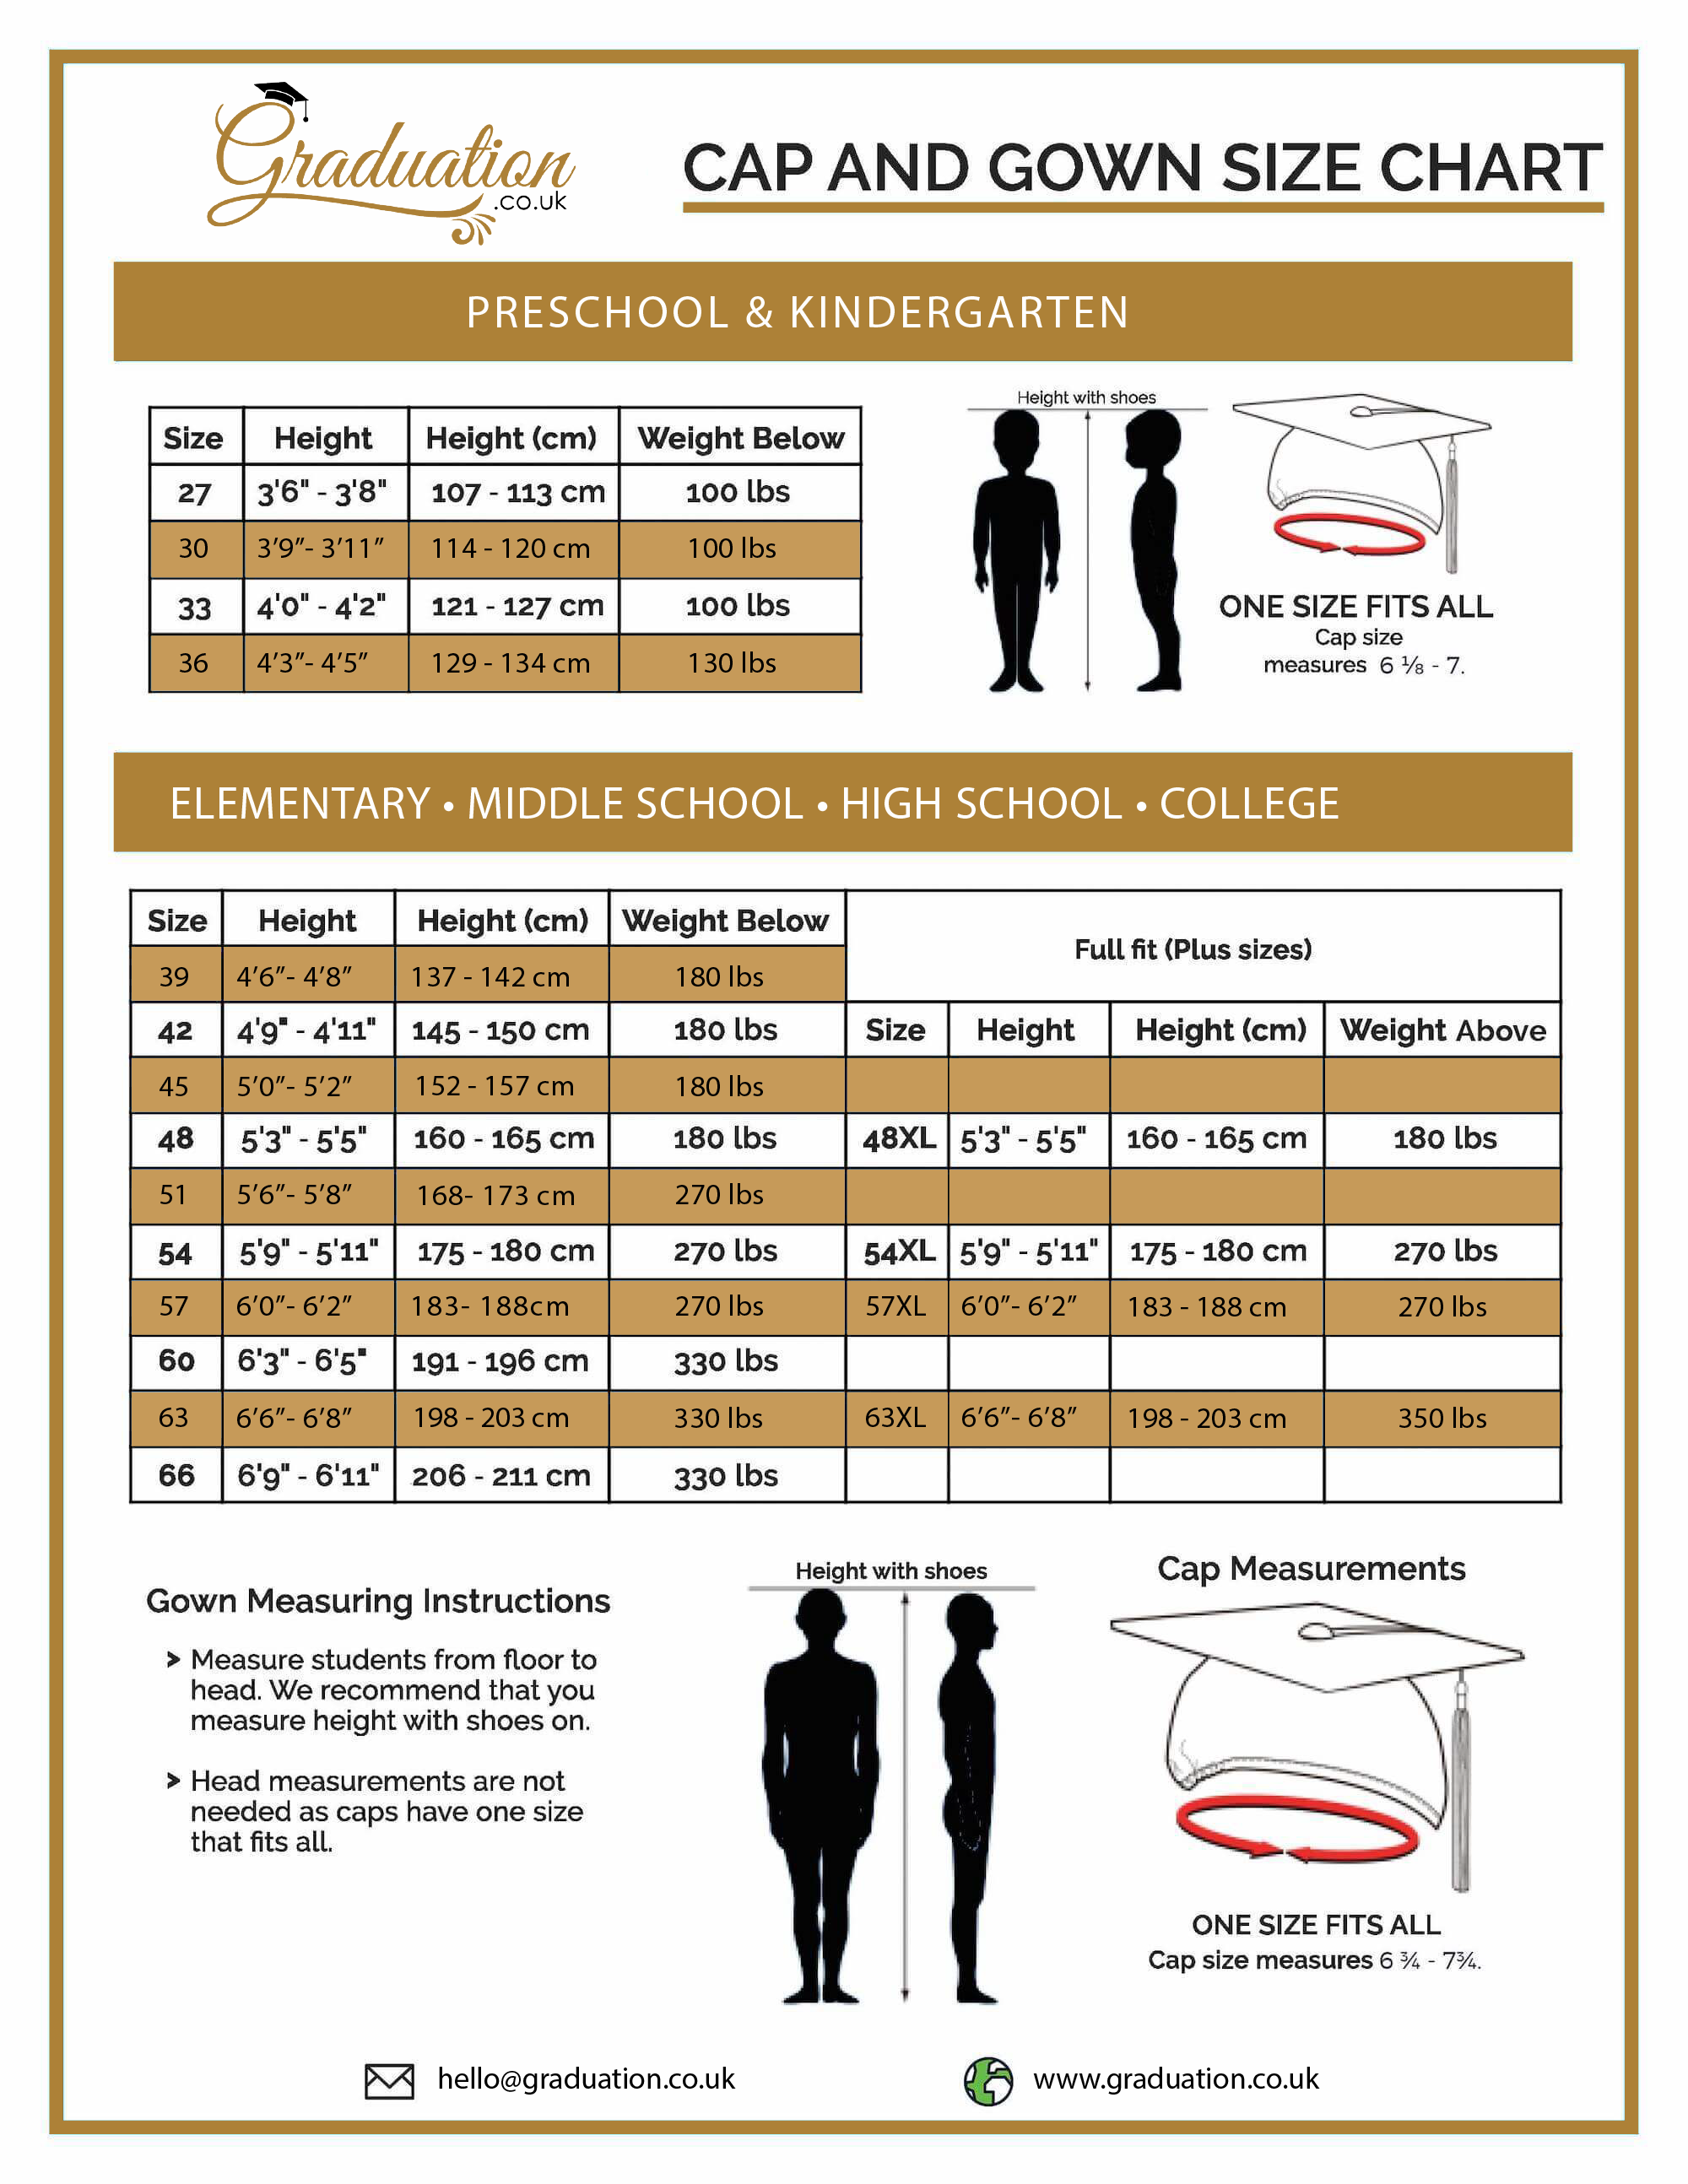 Graduation Cap and Gown - Size, Color and Fabric Charts